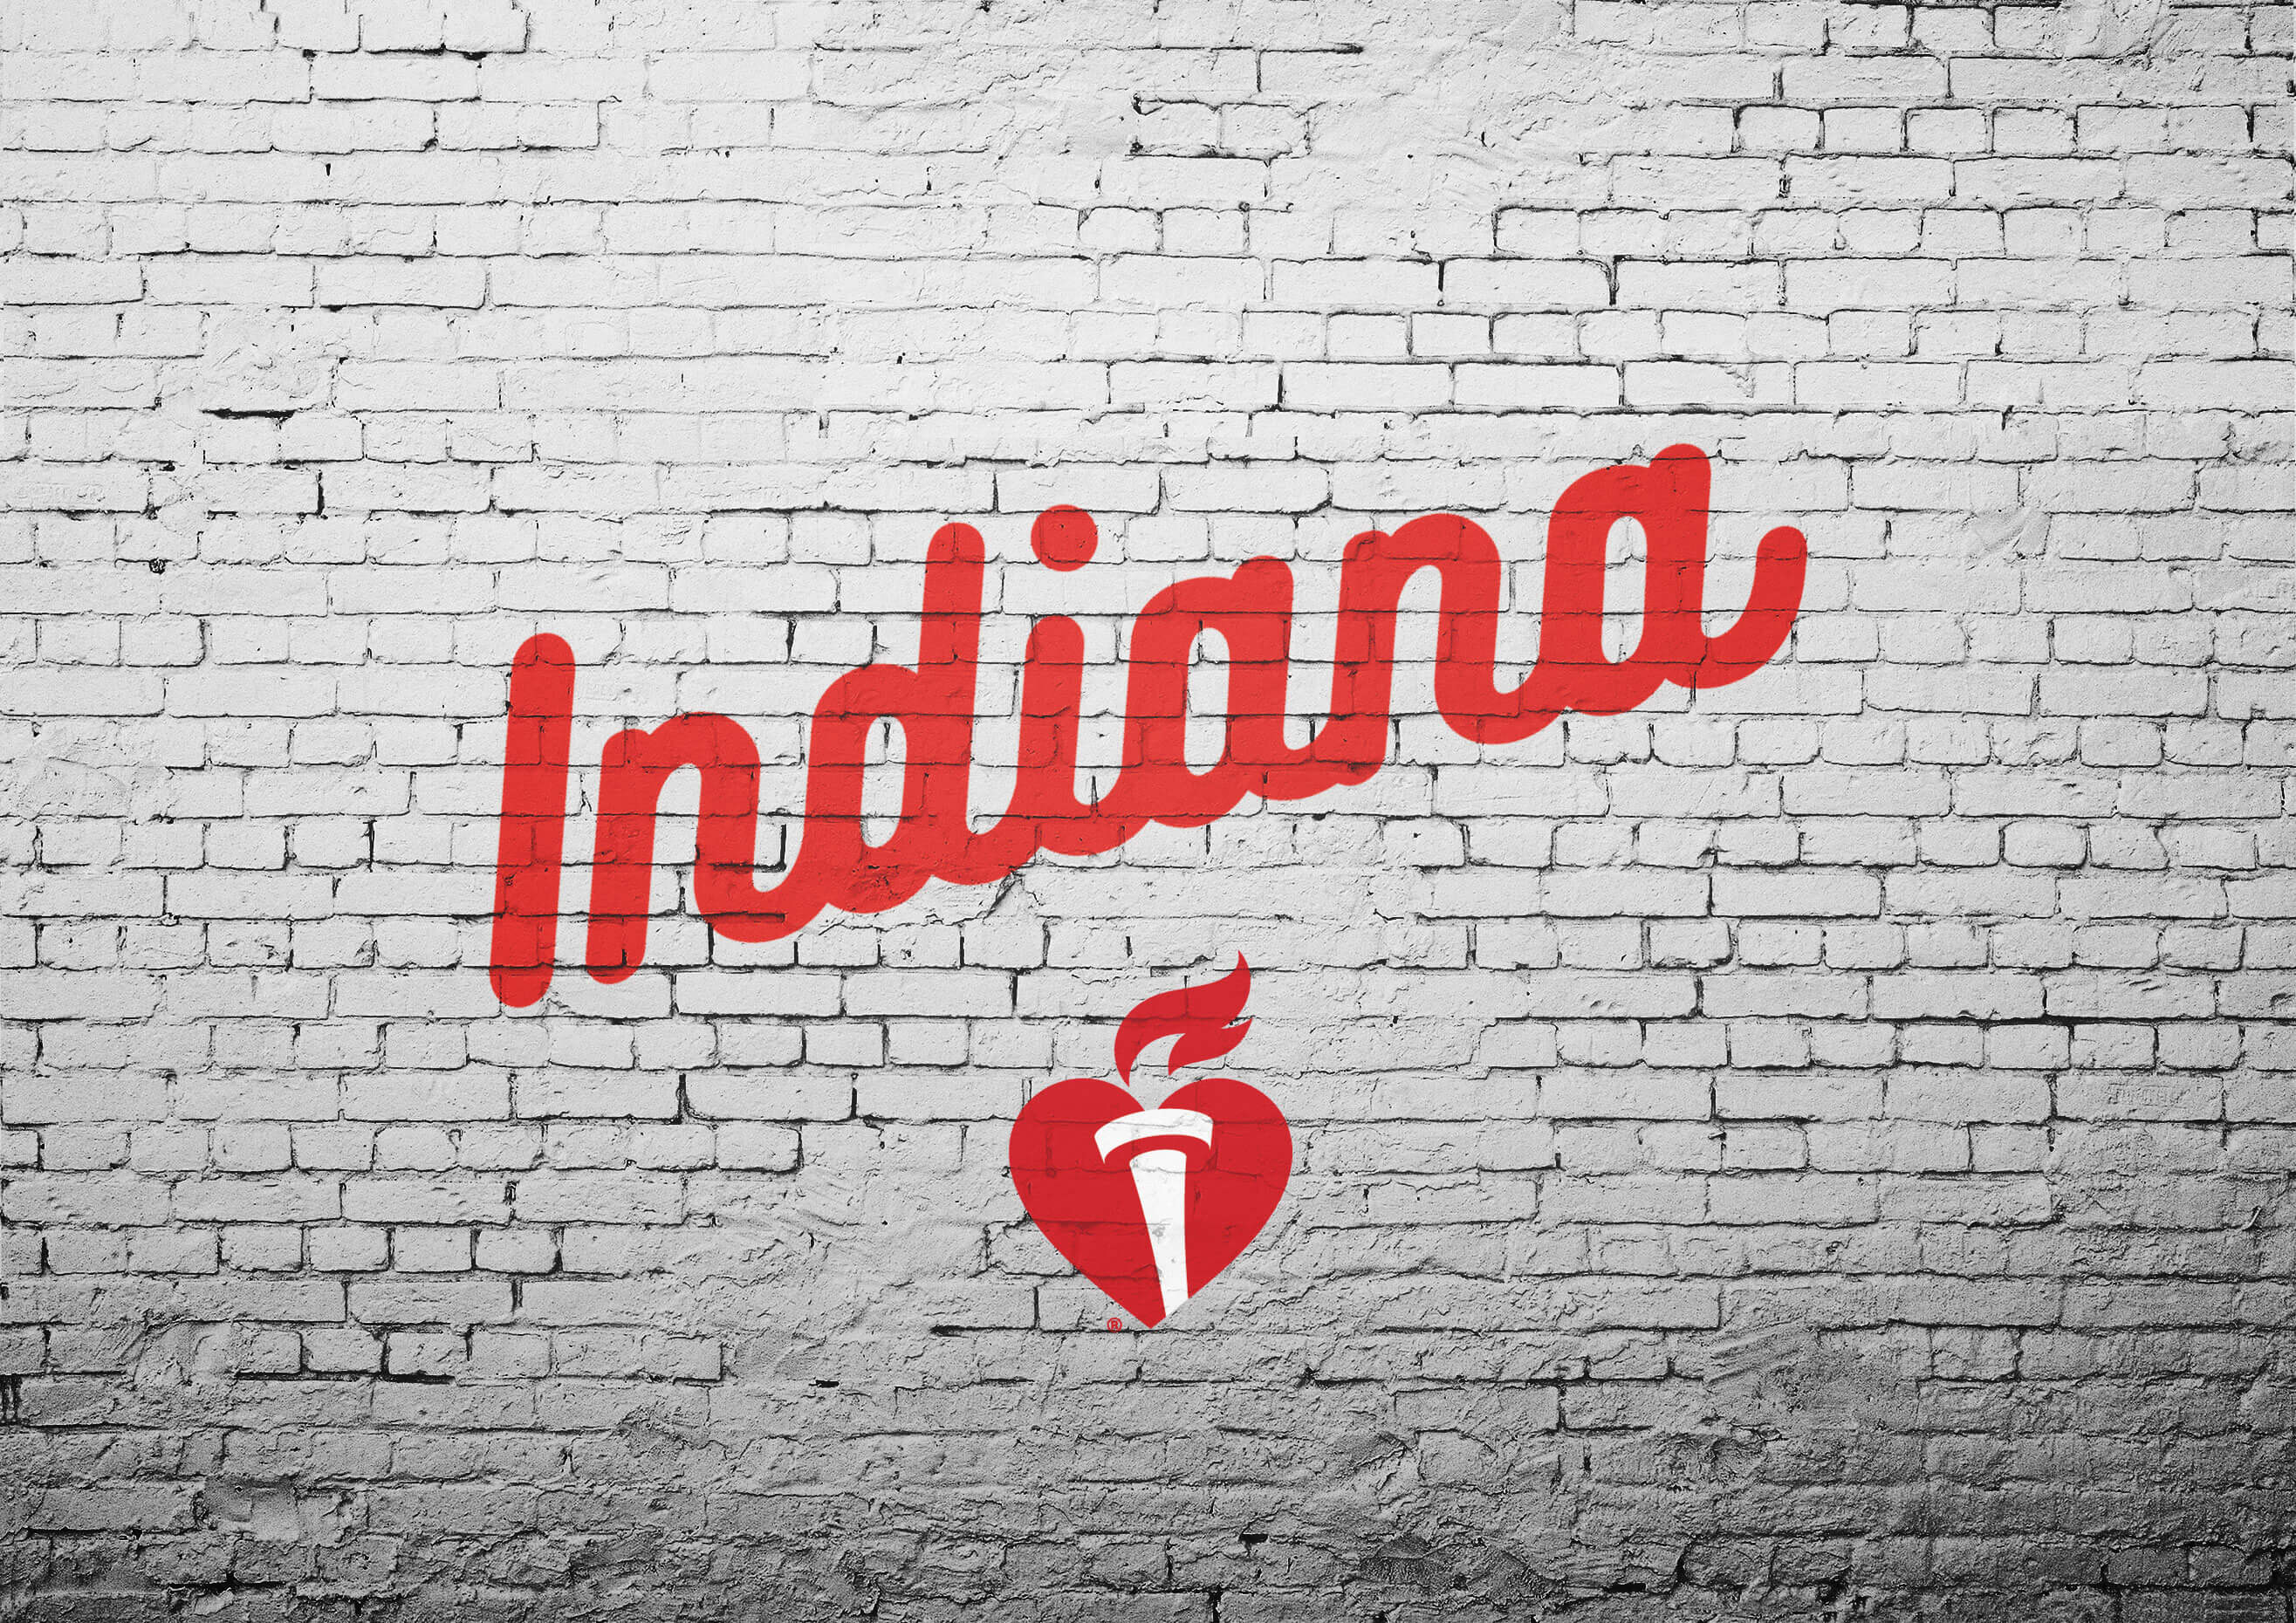 Indiana with Heart and Torch Logo